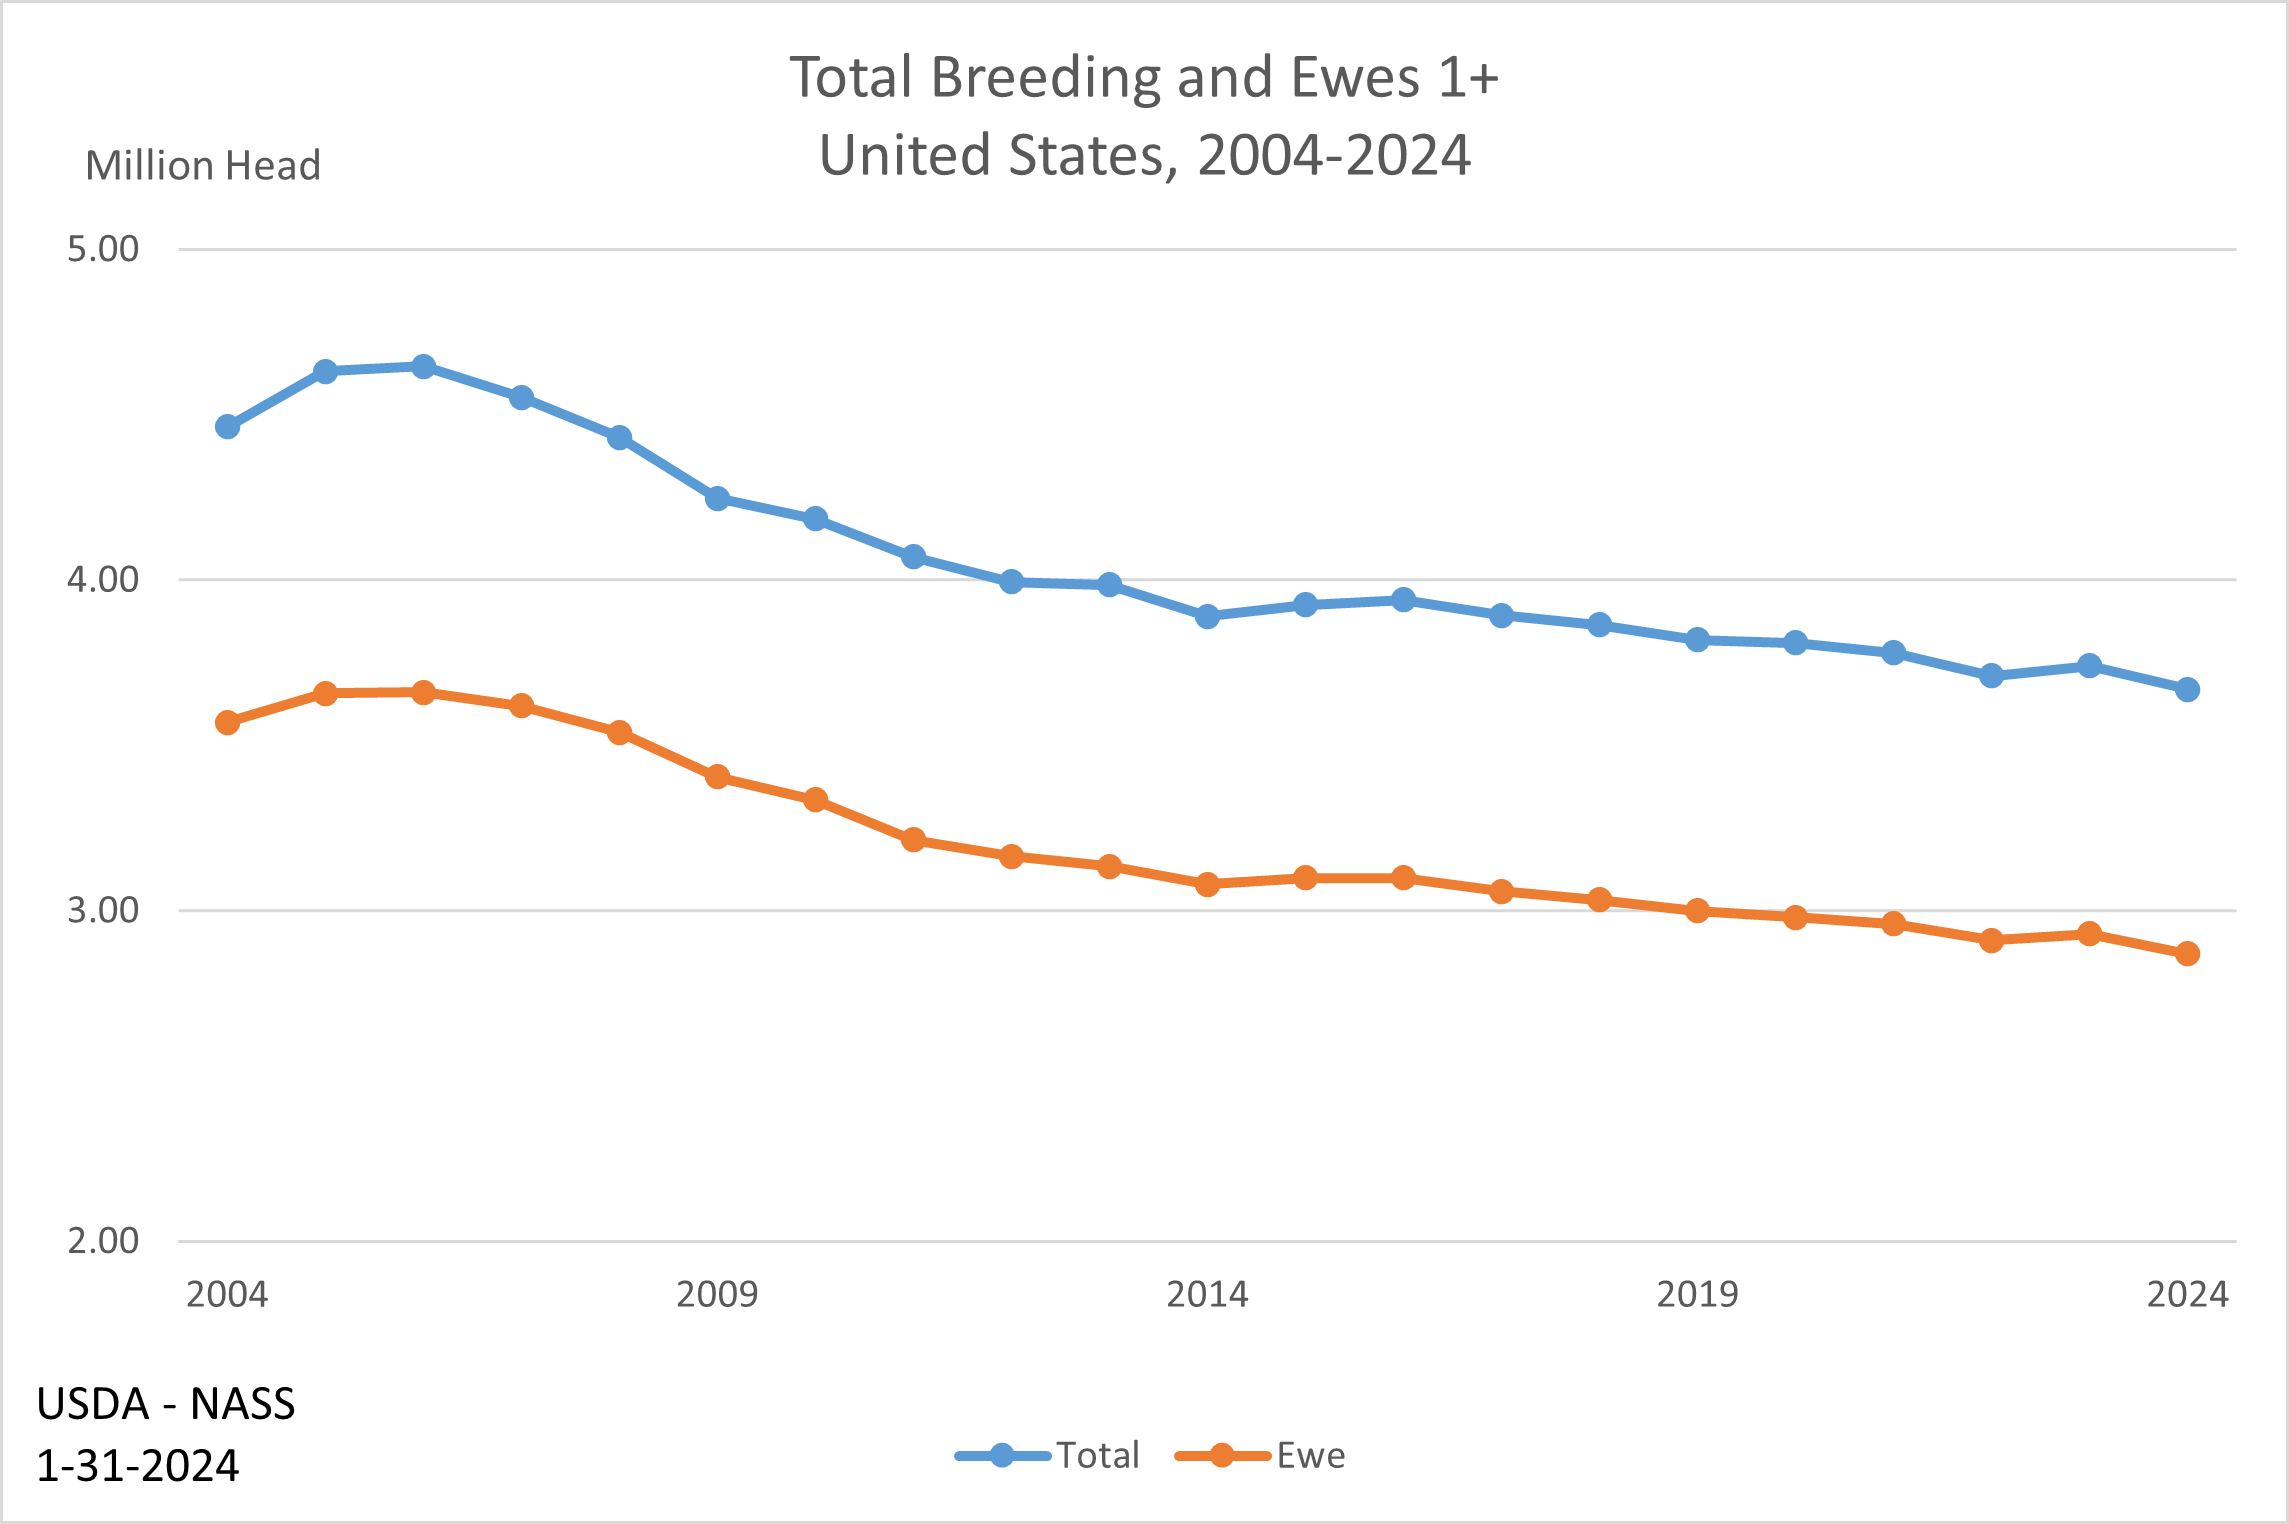 Sheep: Breeding Inventory and Ewes by Year, US